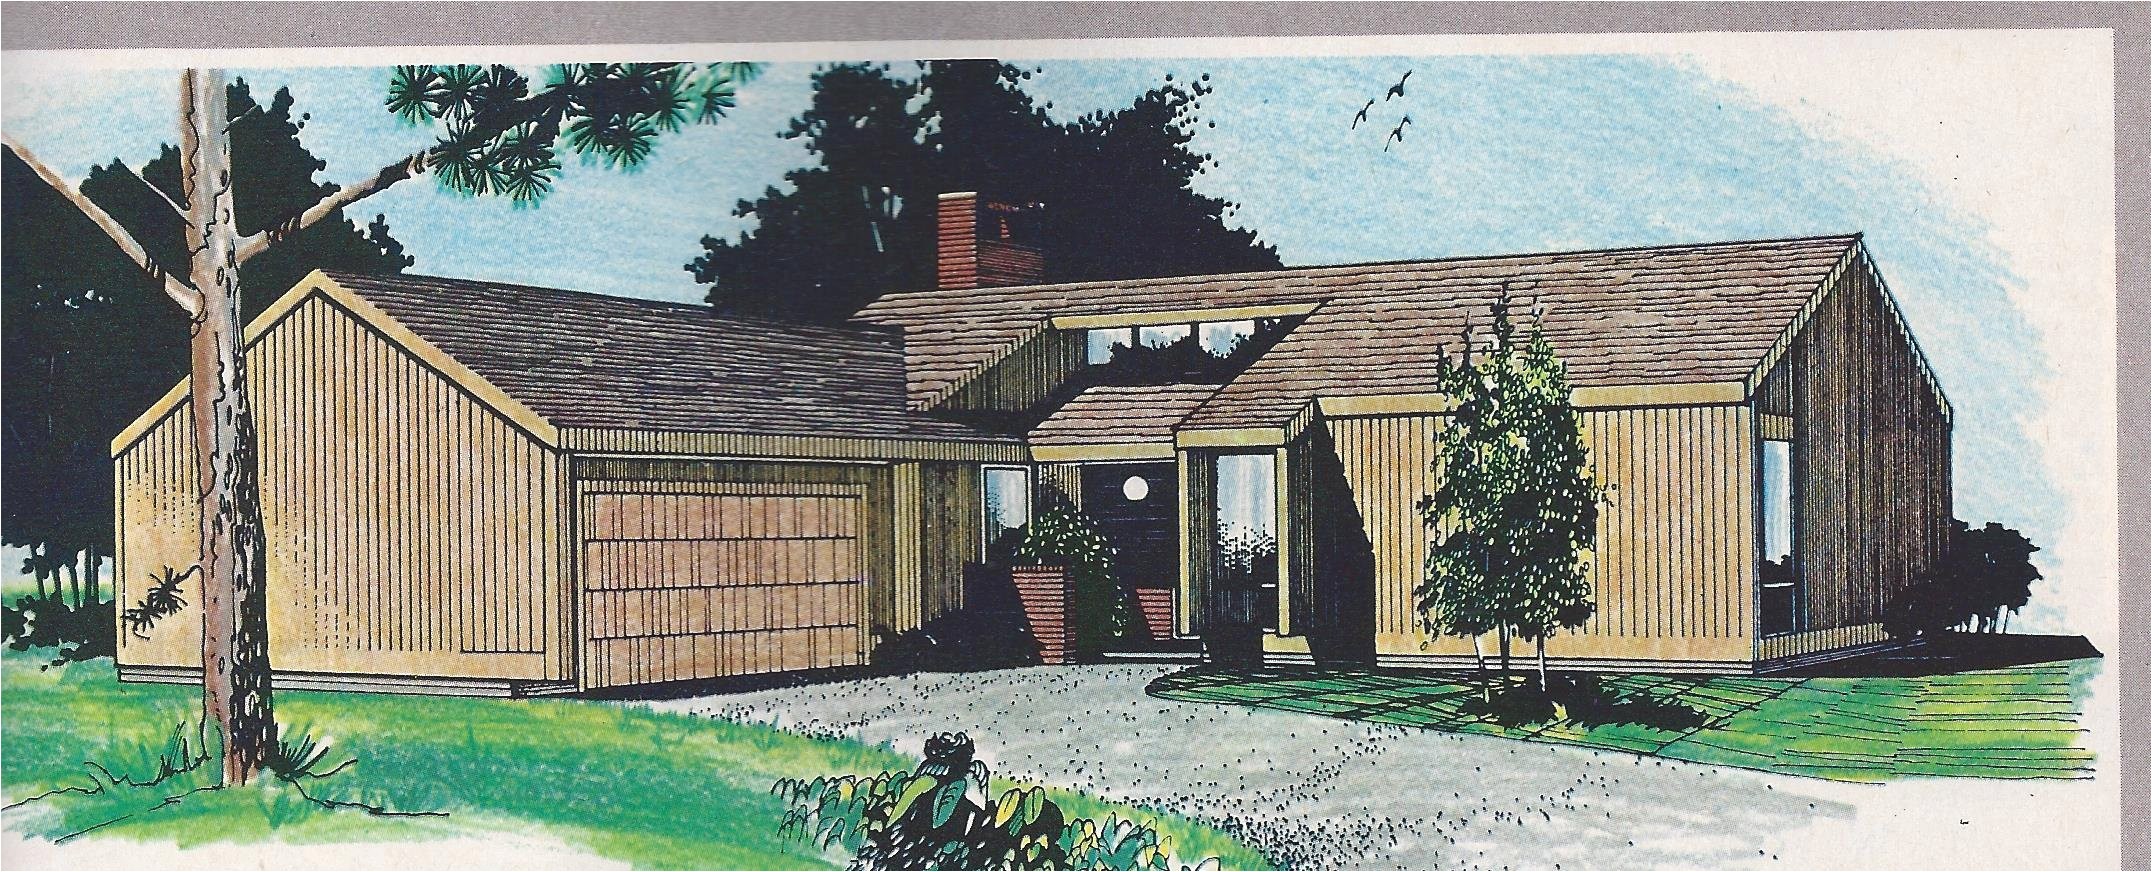 better homes and gardens house plans 1970s delightful better homes and gardens house plans 4